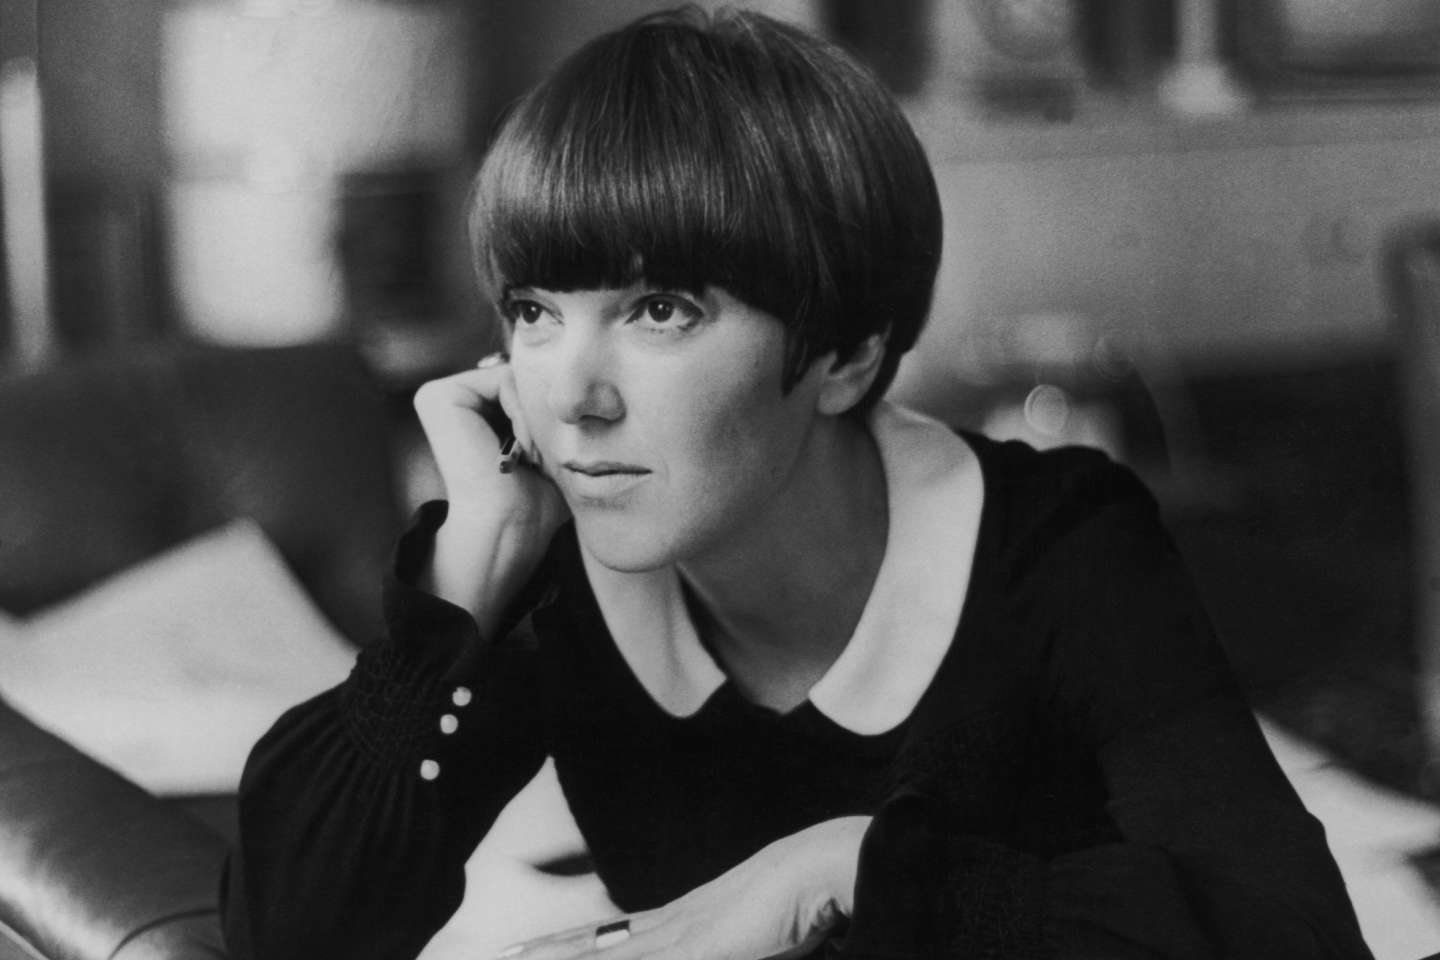 Mary Quant, the designer who popularized the miniskirt, is dead